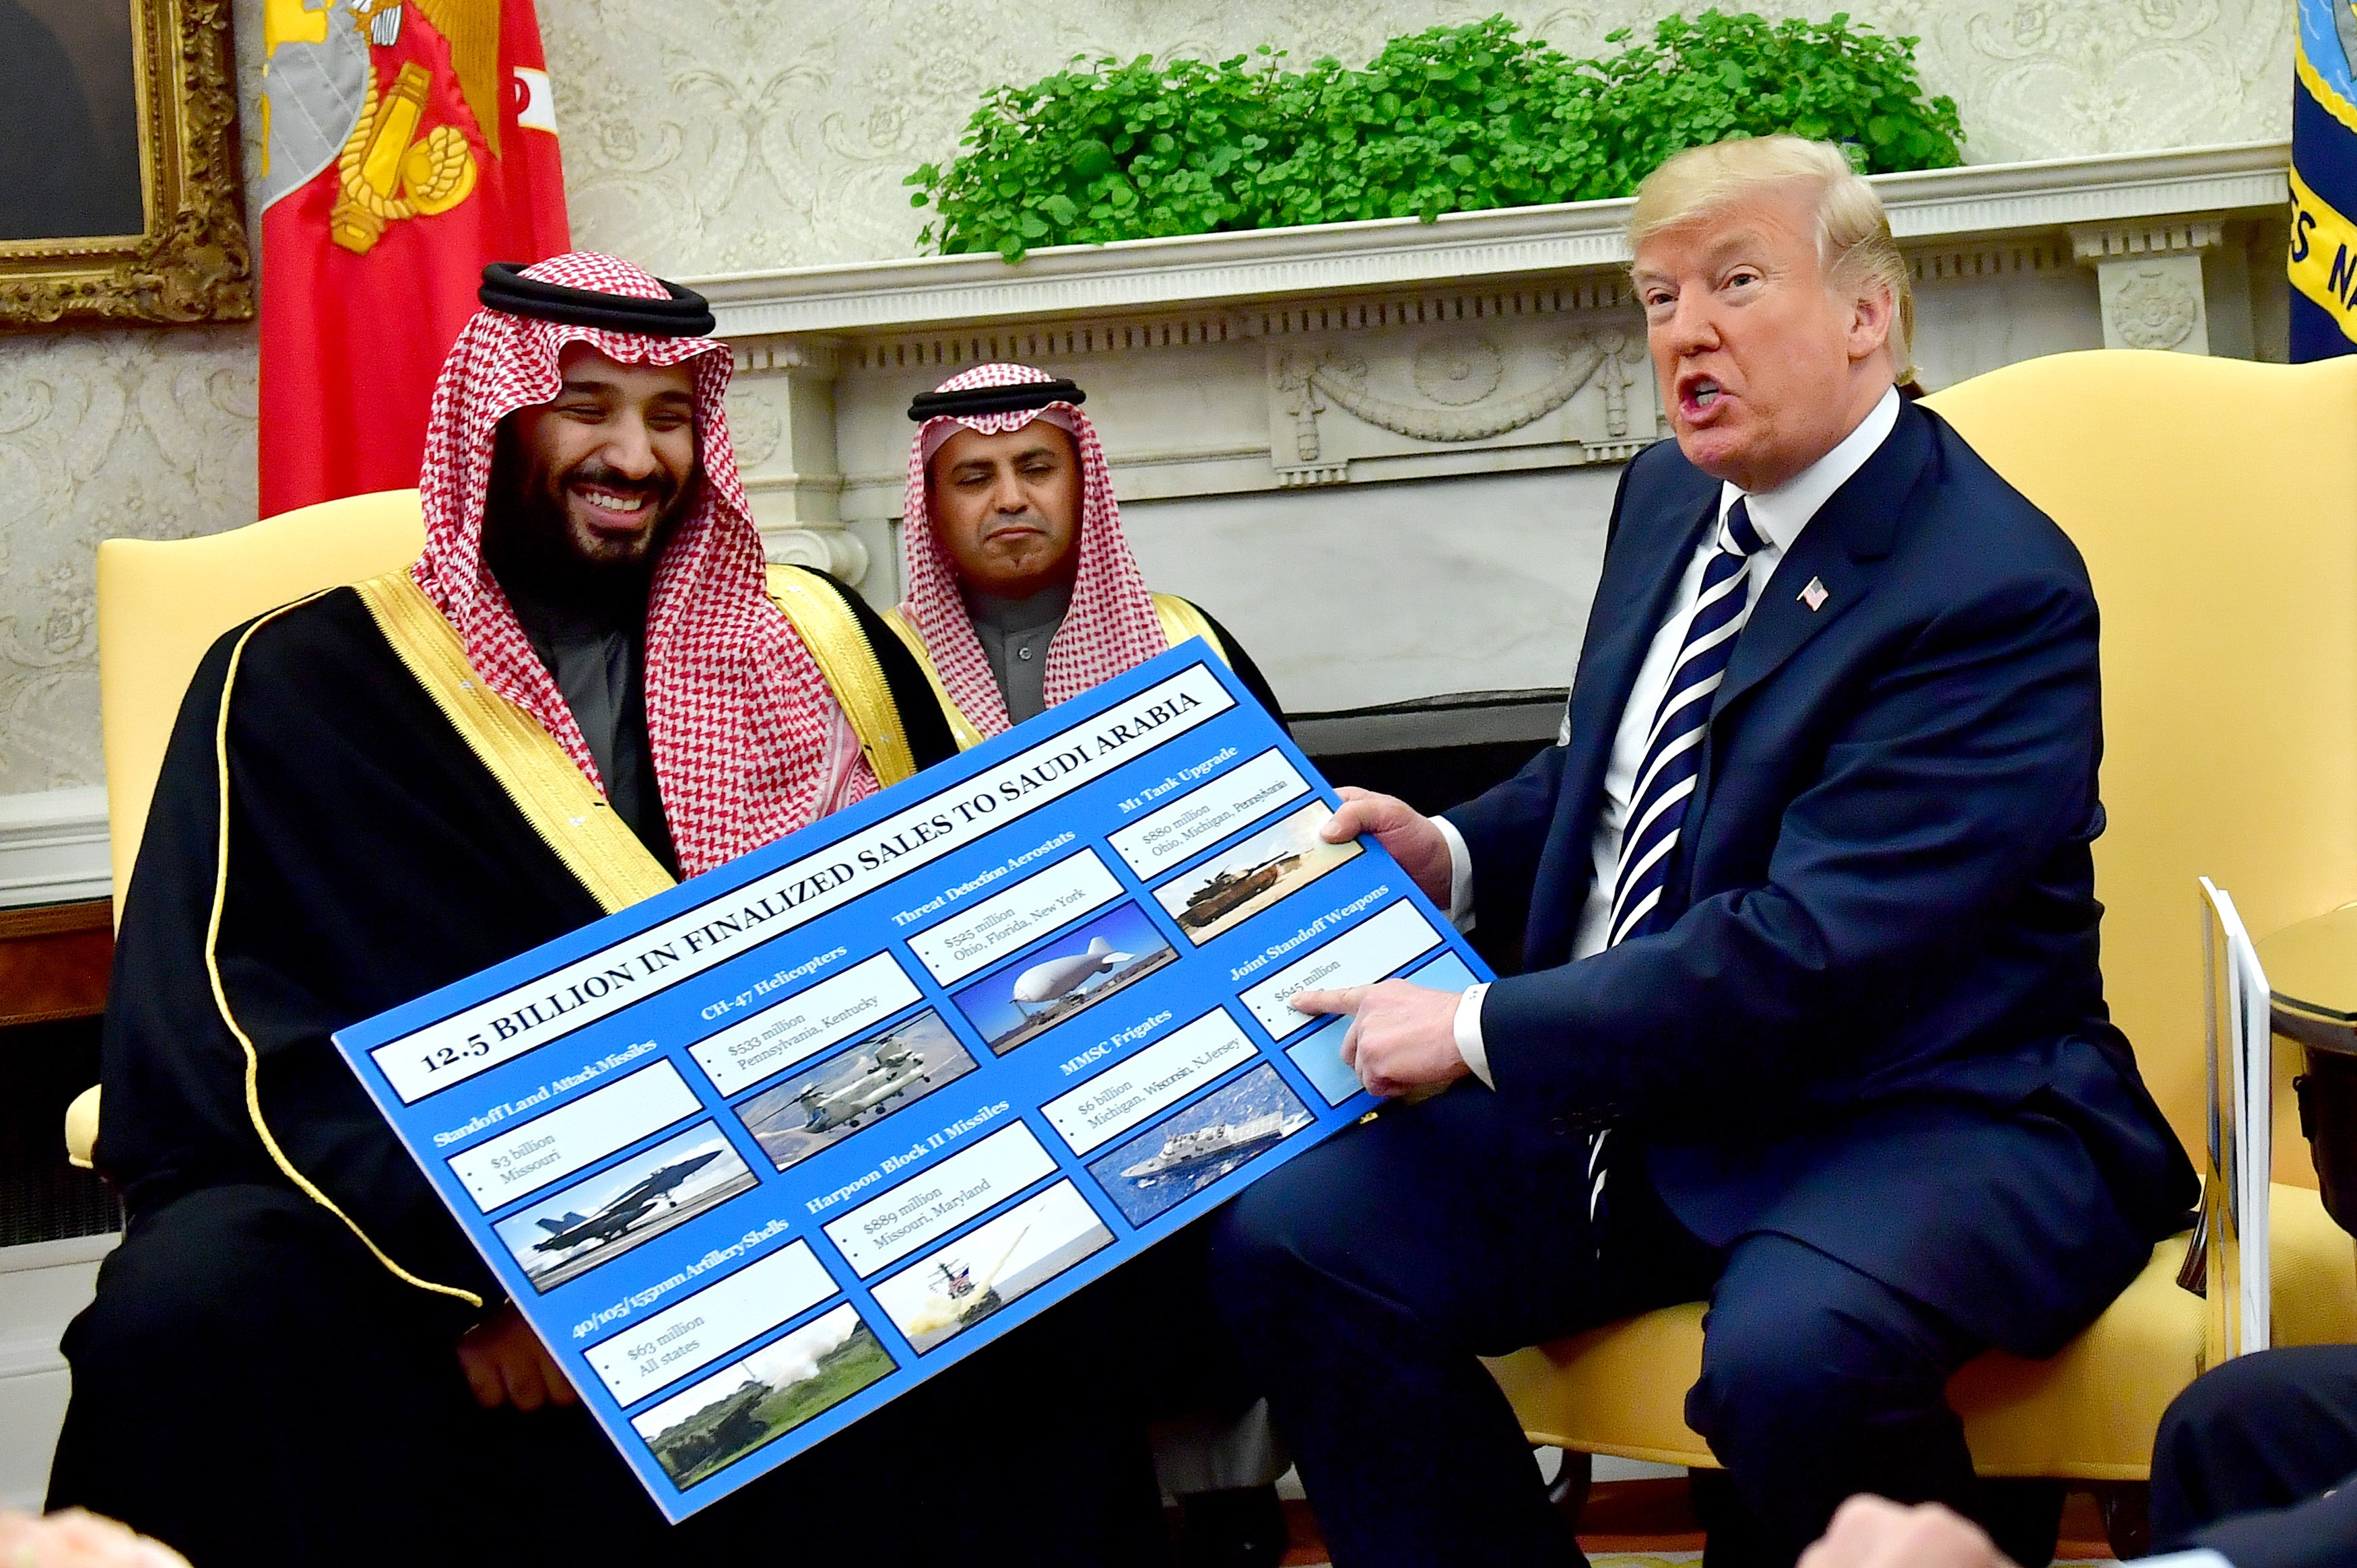 WASHINGTON, DC - MARCH 20: President Donald Trump (R) holds up a chart of military hardware sales as he meets with Crown Prince Mohammed bin Salman of the Kingdom of Saudi Arabia in the Oval Office at the White House on March 20, 2018 in Washington, D.C. (Photo by Kevin Dietsch-Pool/Getty Images)